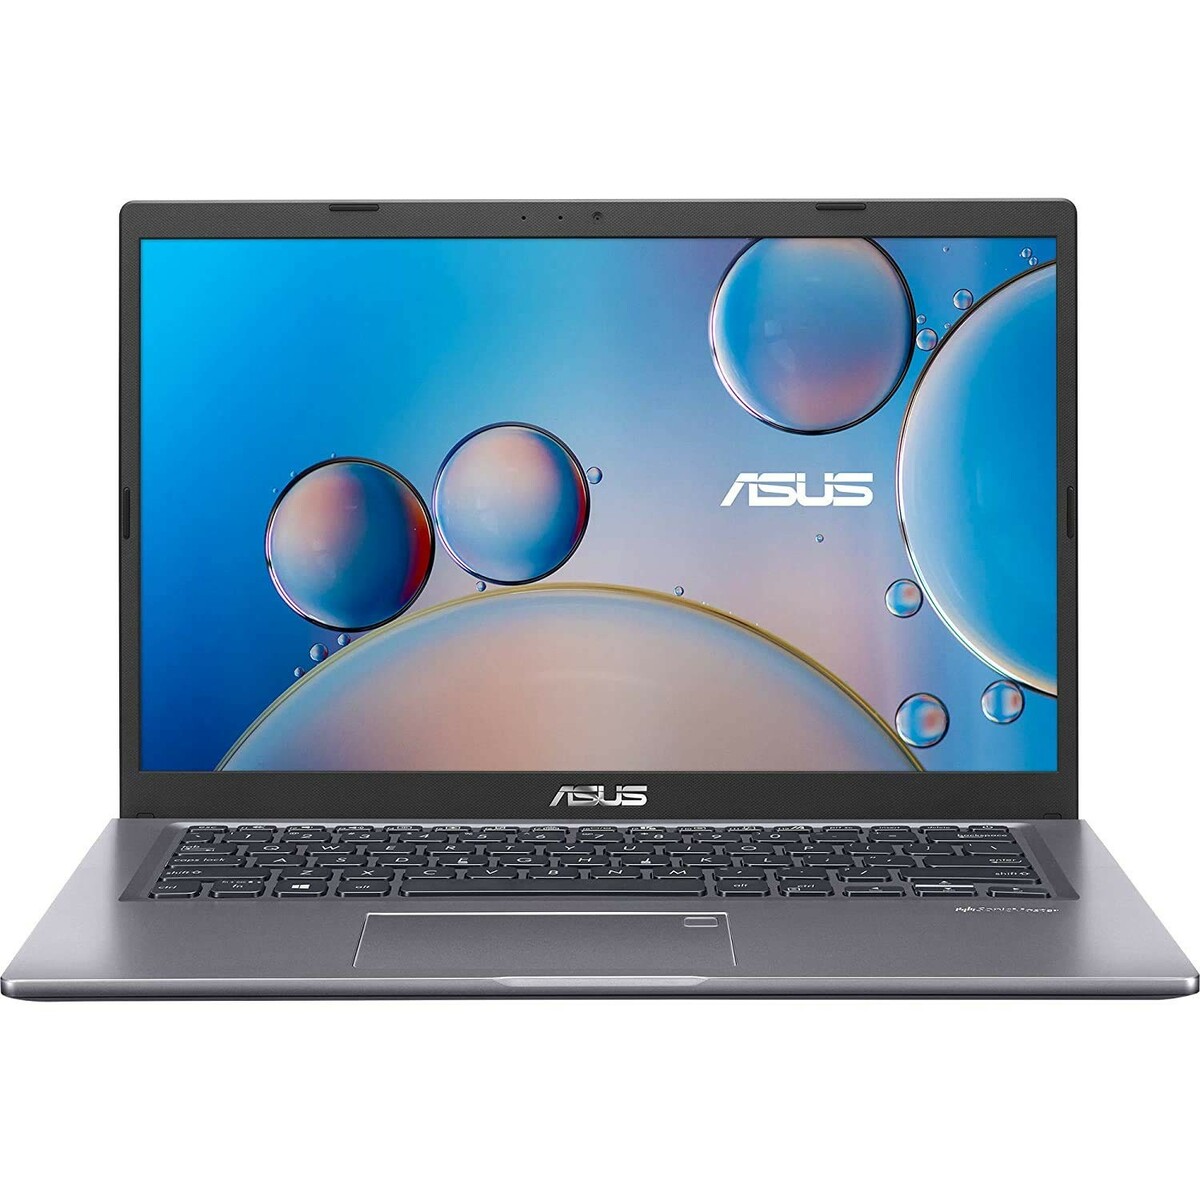 Asus Notebook EB616T Core i3  10th Gen 14" Win10 Grey